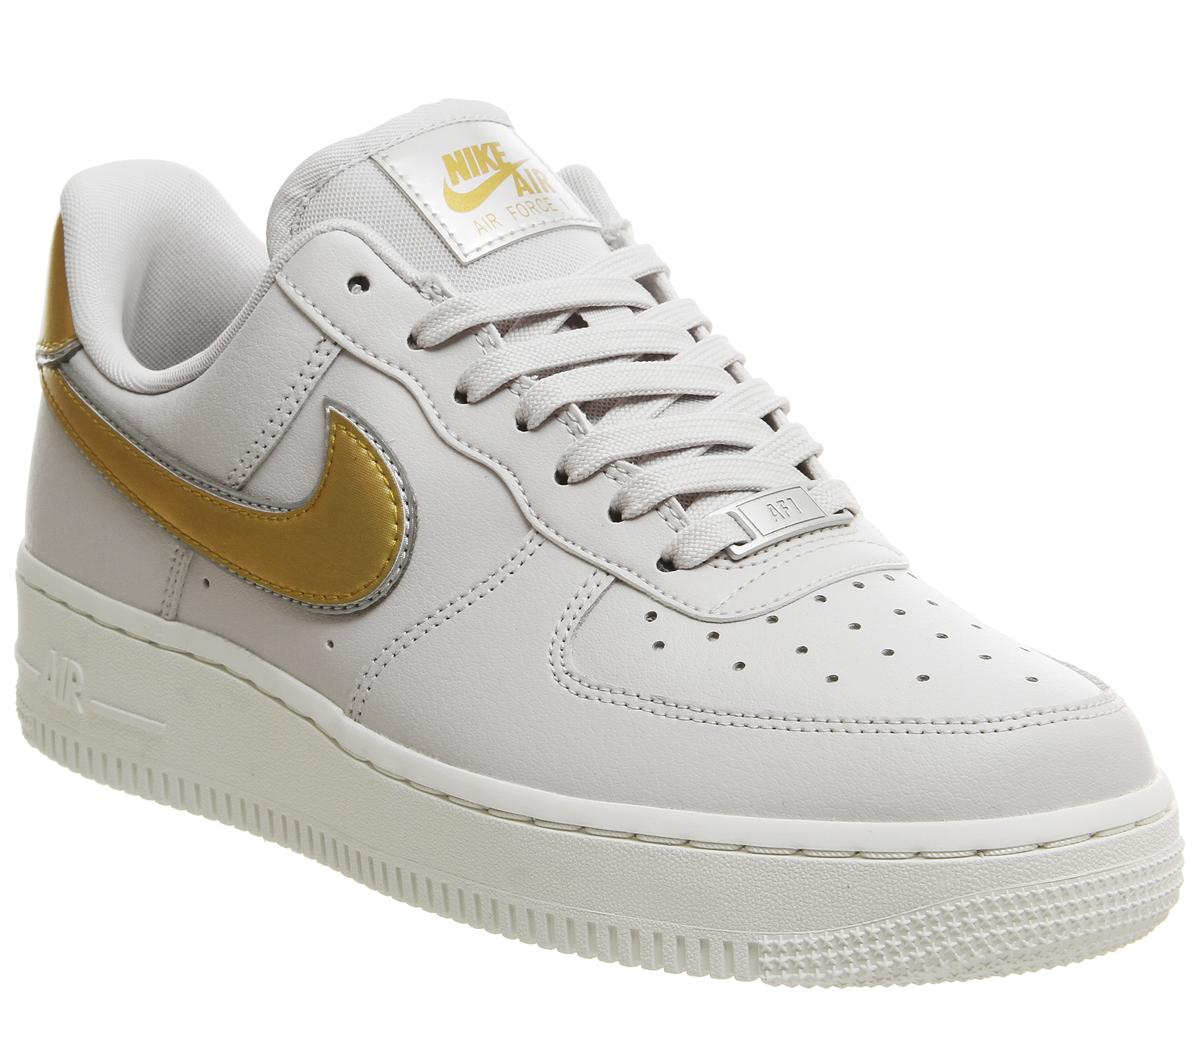 Nike Air Force 1 07 Trainers Vast Grey Gold Summit White Platinum Mtlc -  Hers trainers